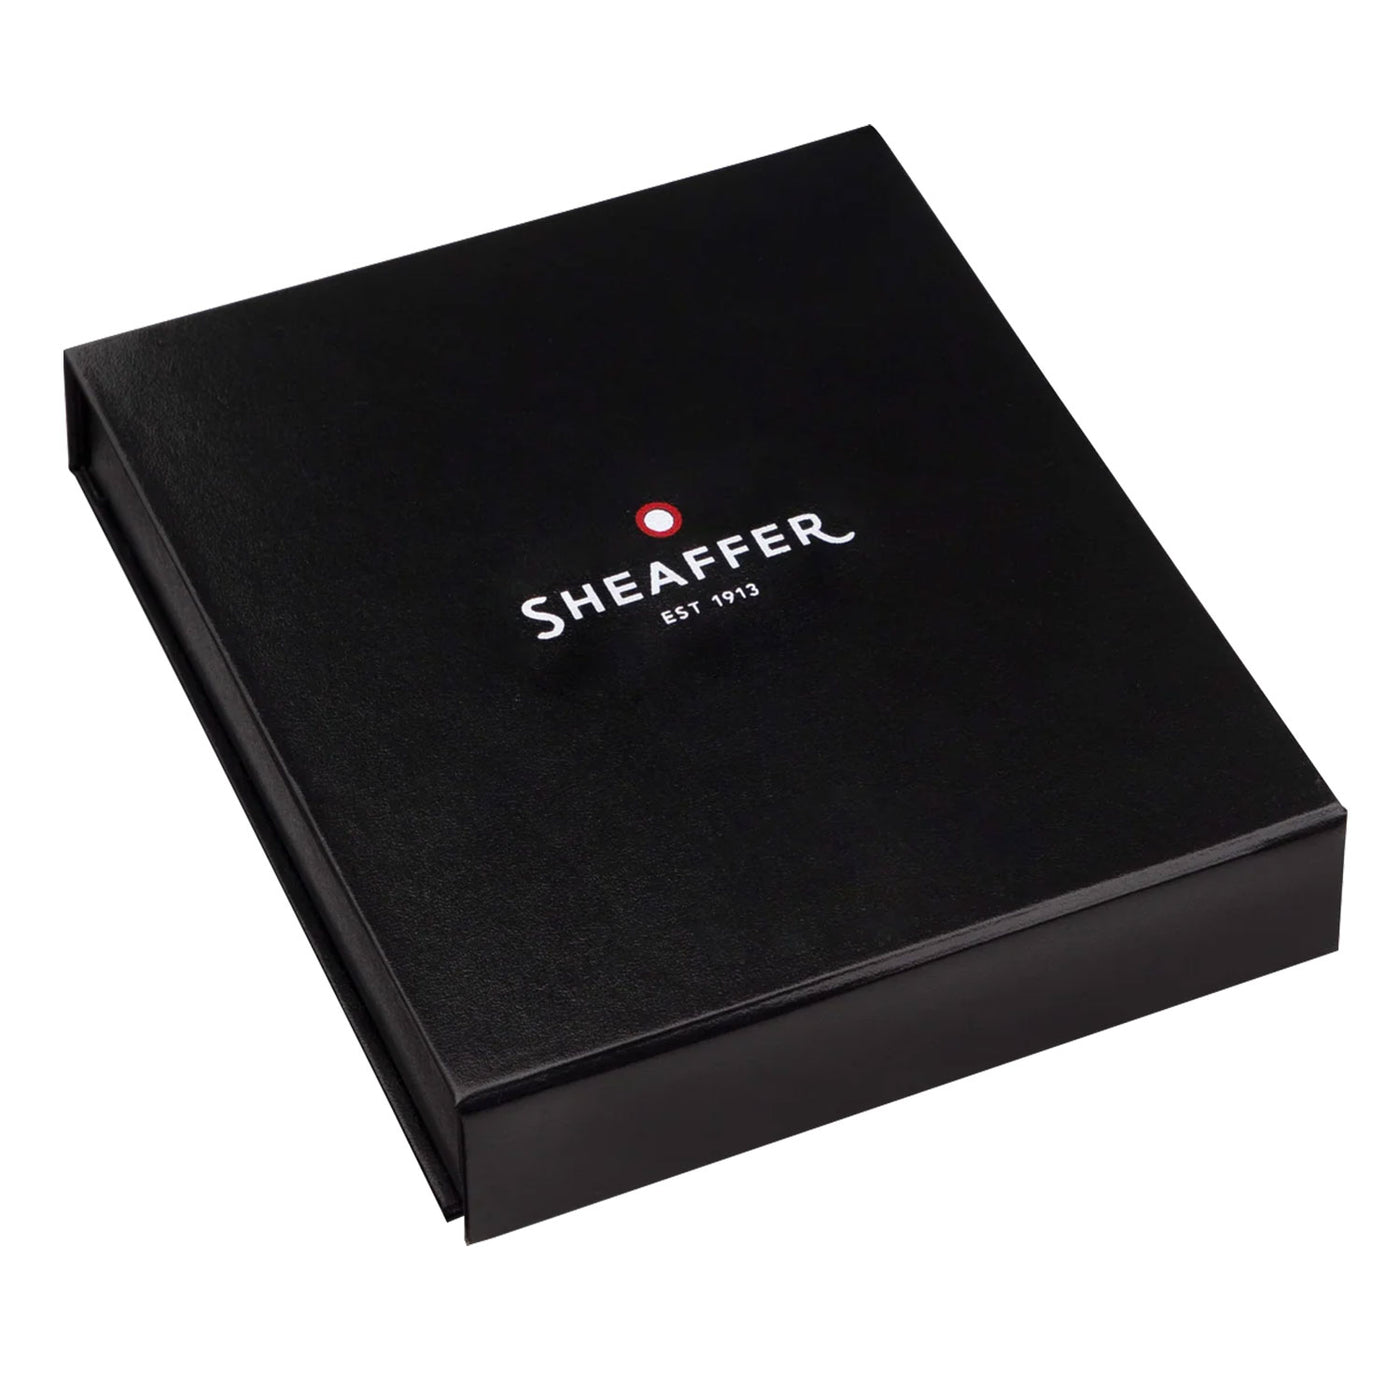 Sheaffer Gift Set - 300 Series Bright Chrome GT Ball Pen with Credit Card Holder